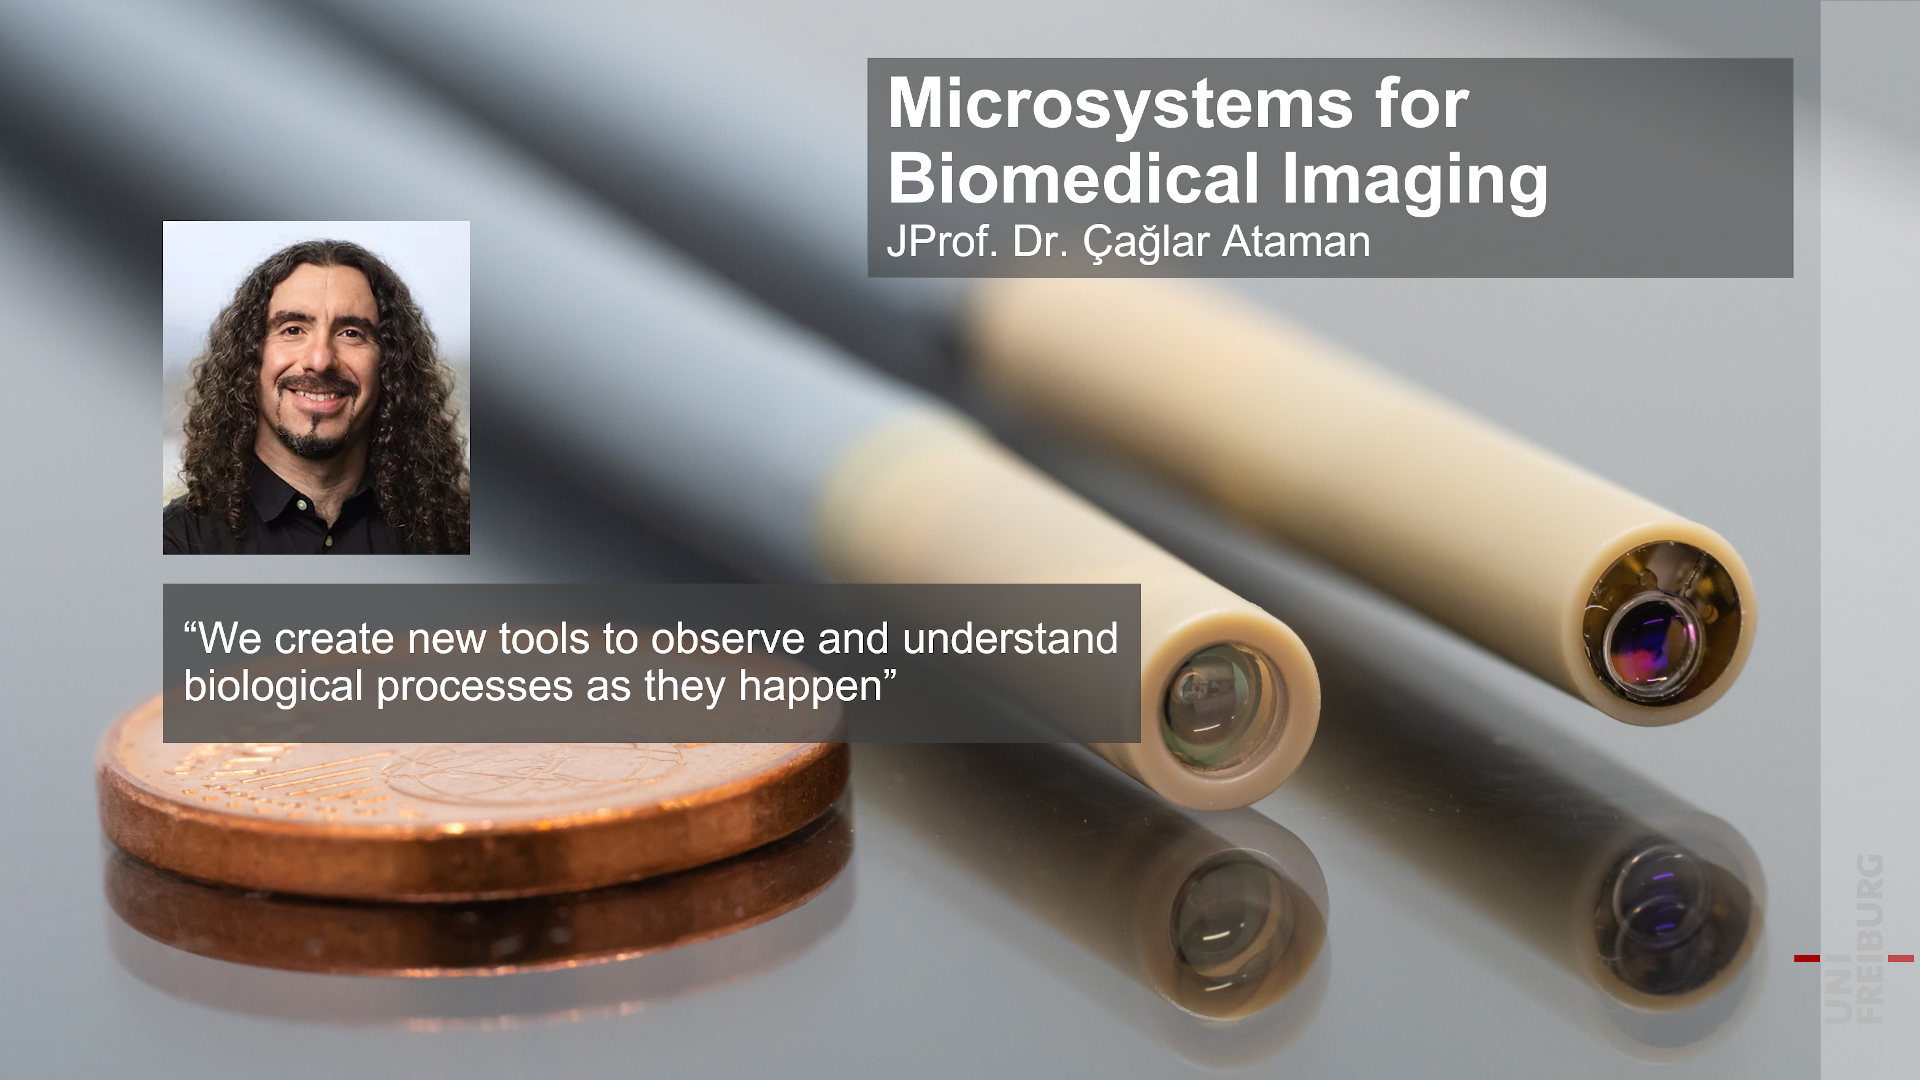 Microsystems for Biomedical Imaging Laboratory